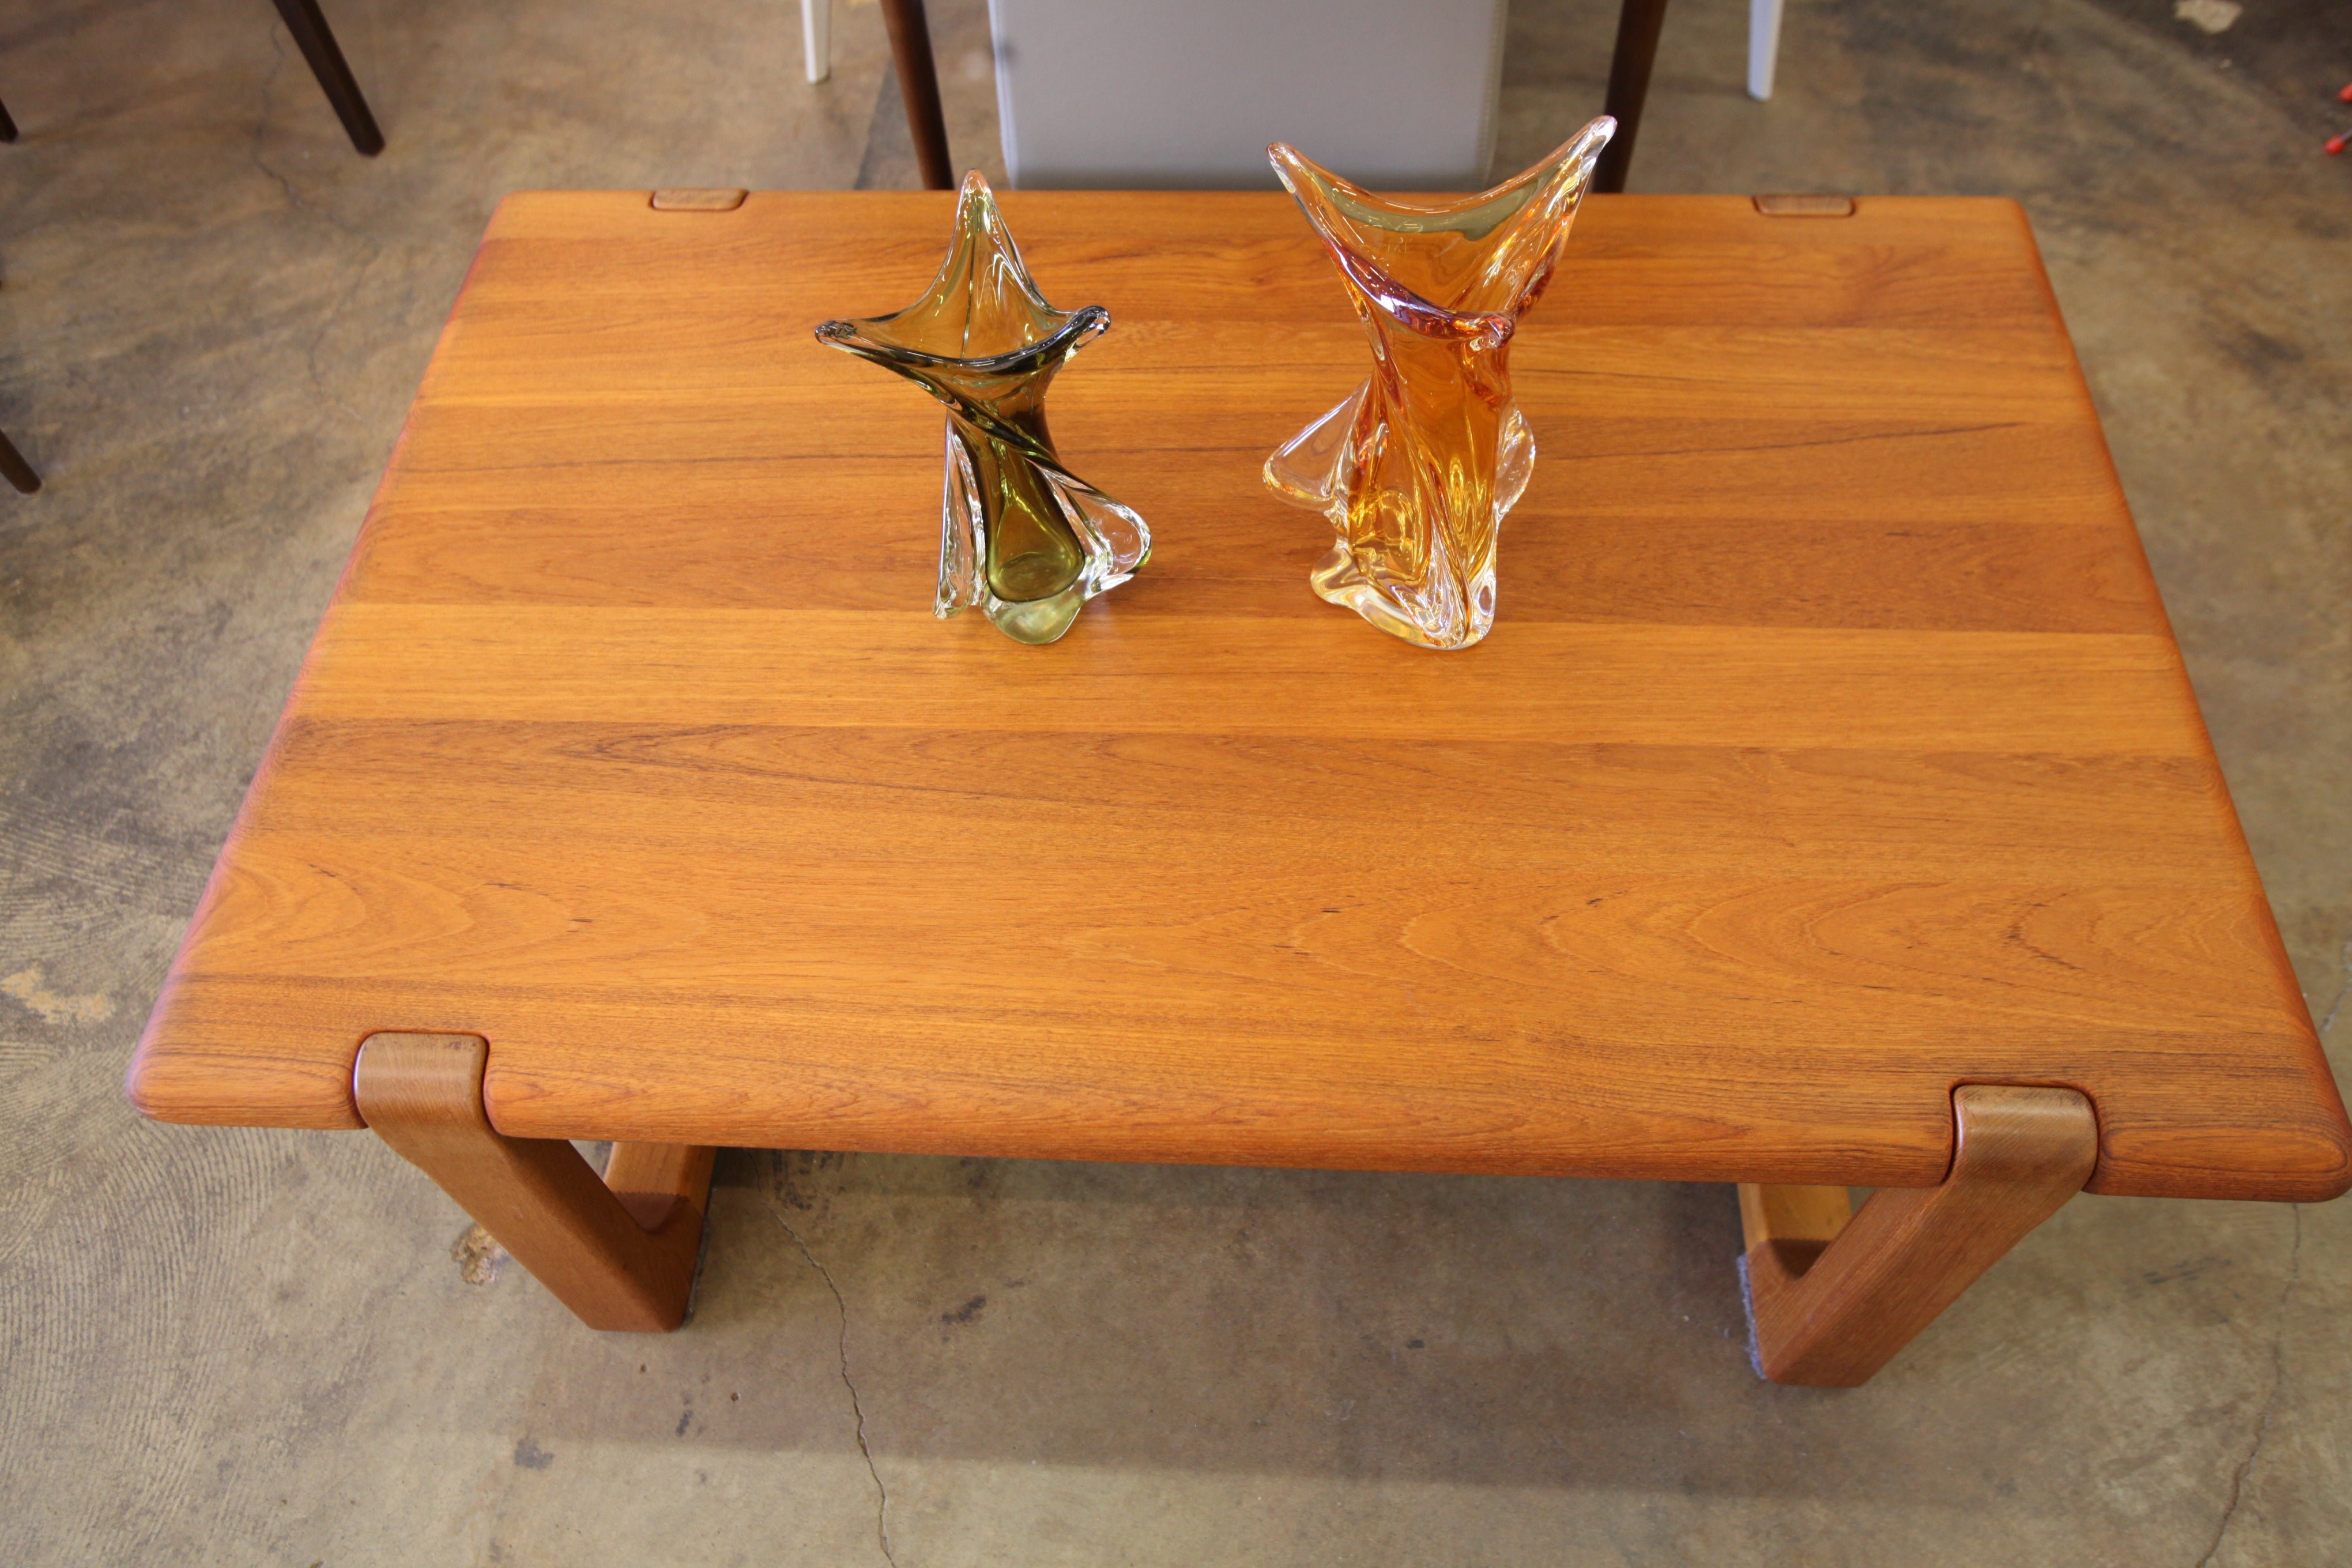 Vintage "SOLID TEAK" Coffee Table by Niels Bach (47.25" x 31.25" x 16.5"H)